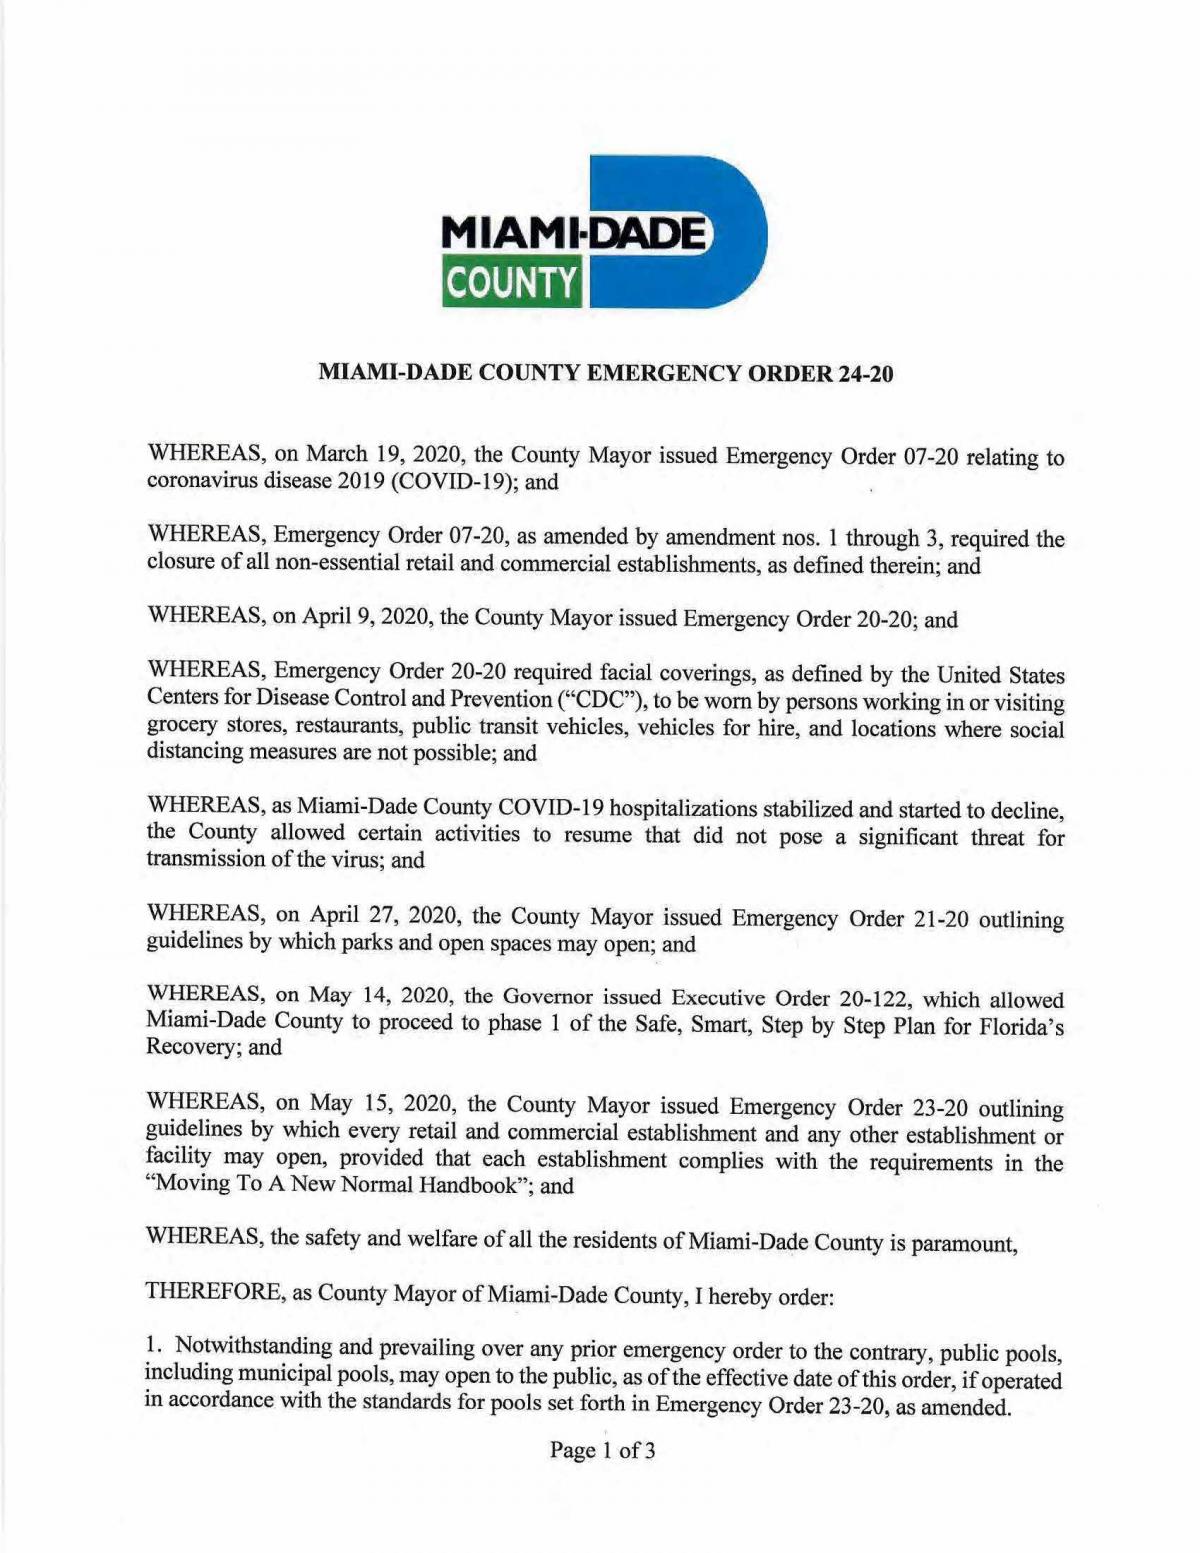 Miami-Dade County Emergency Order 24-20 page 1